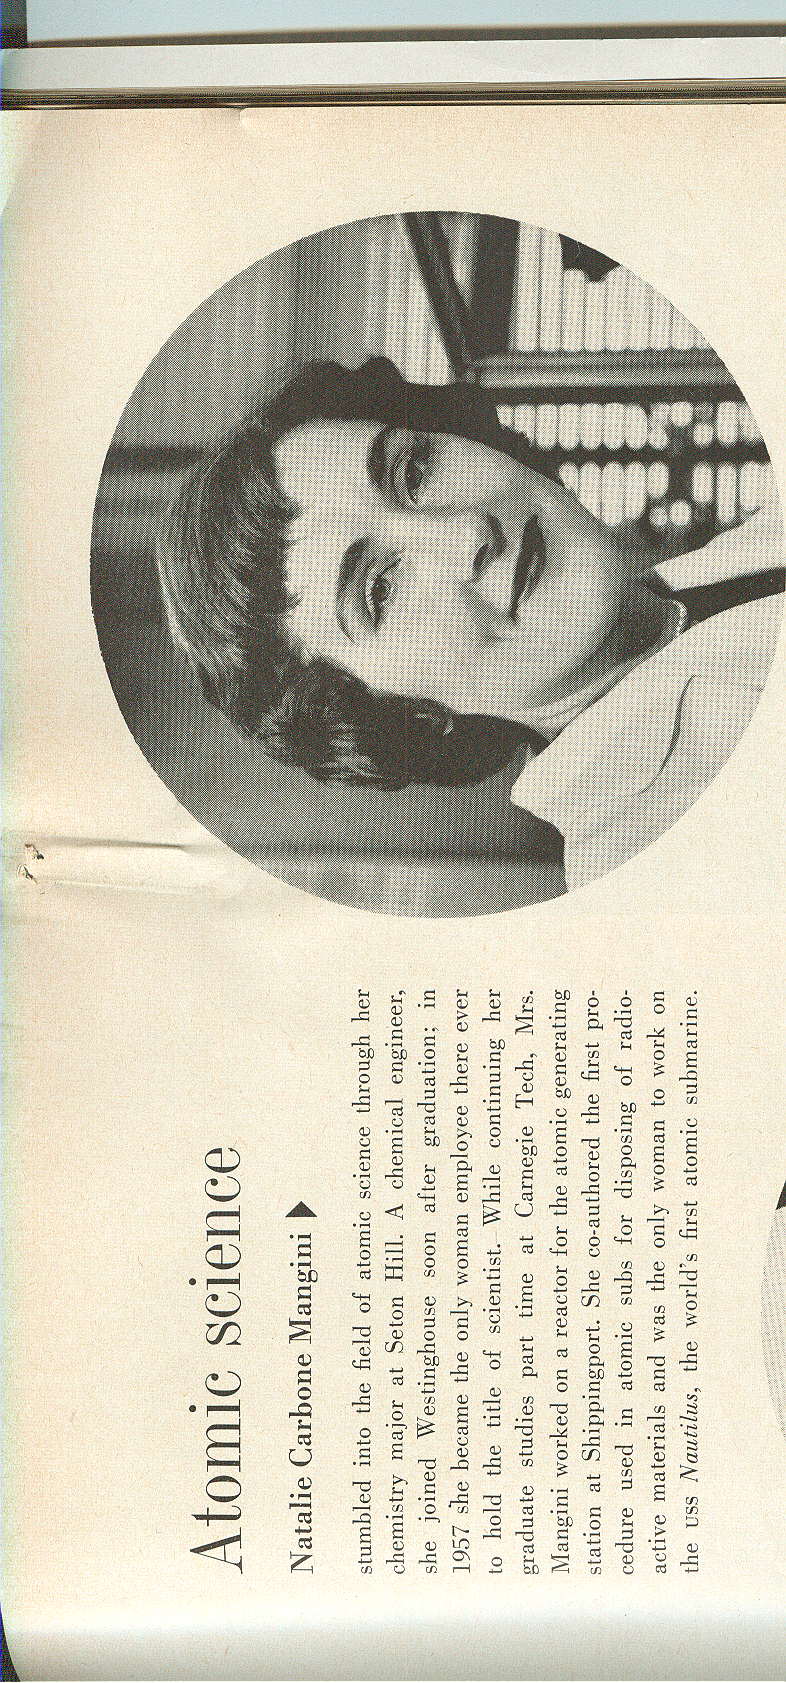 article from mademoiselle magazine in 1959 2.tif